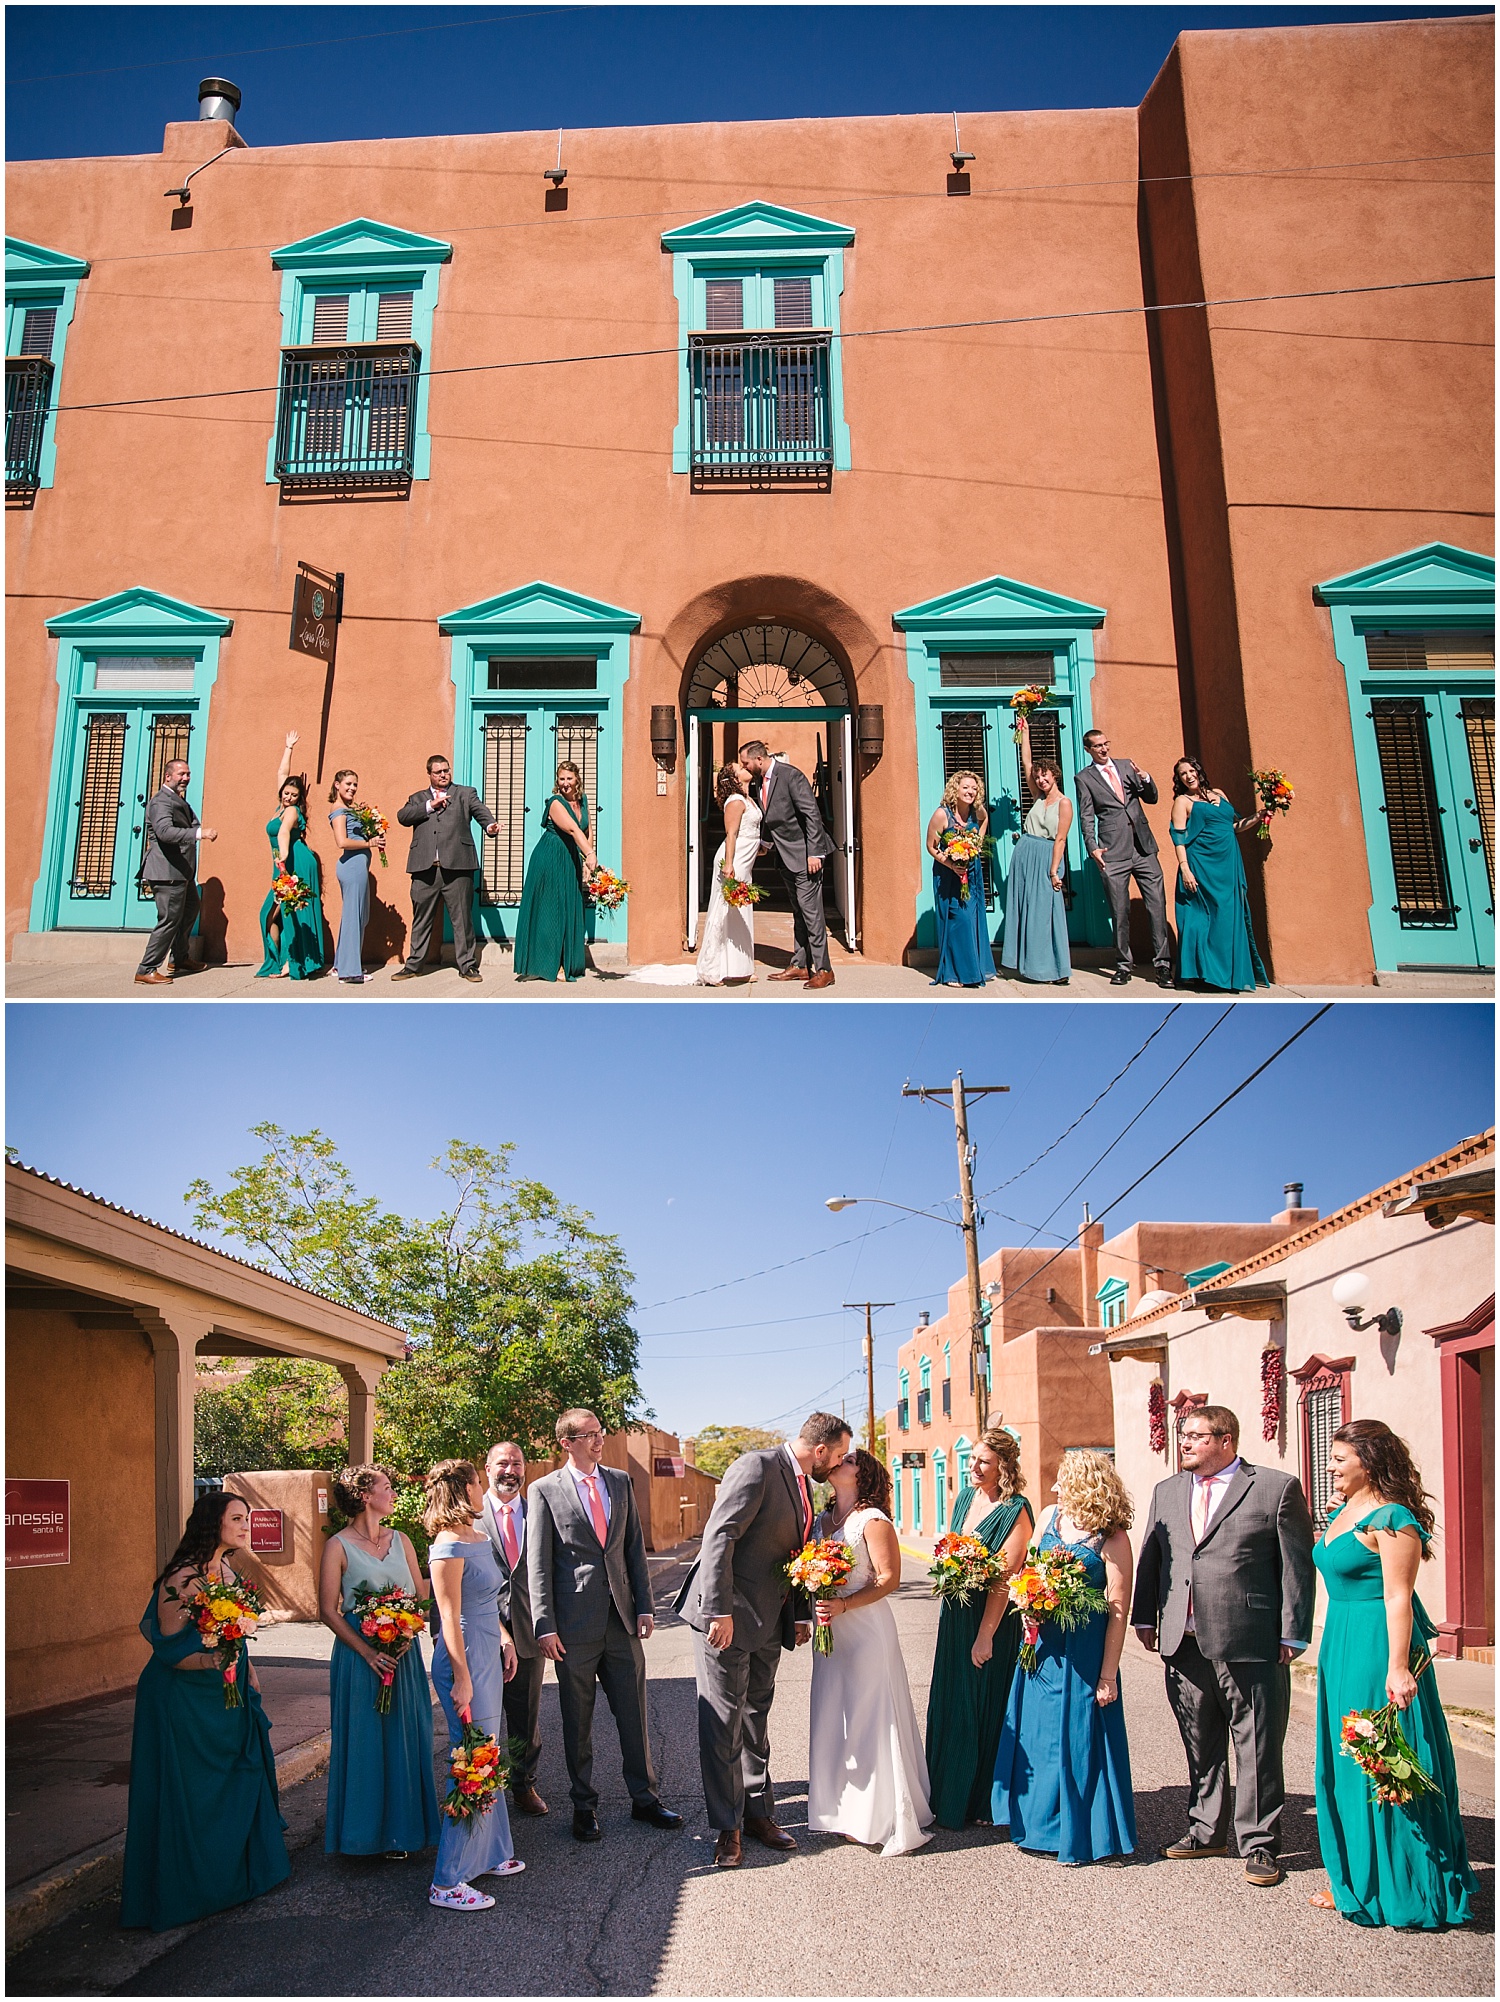 Bright and colorful wedding party portraits around Santa Fe New Mexico